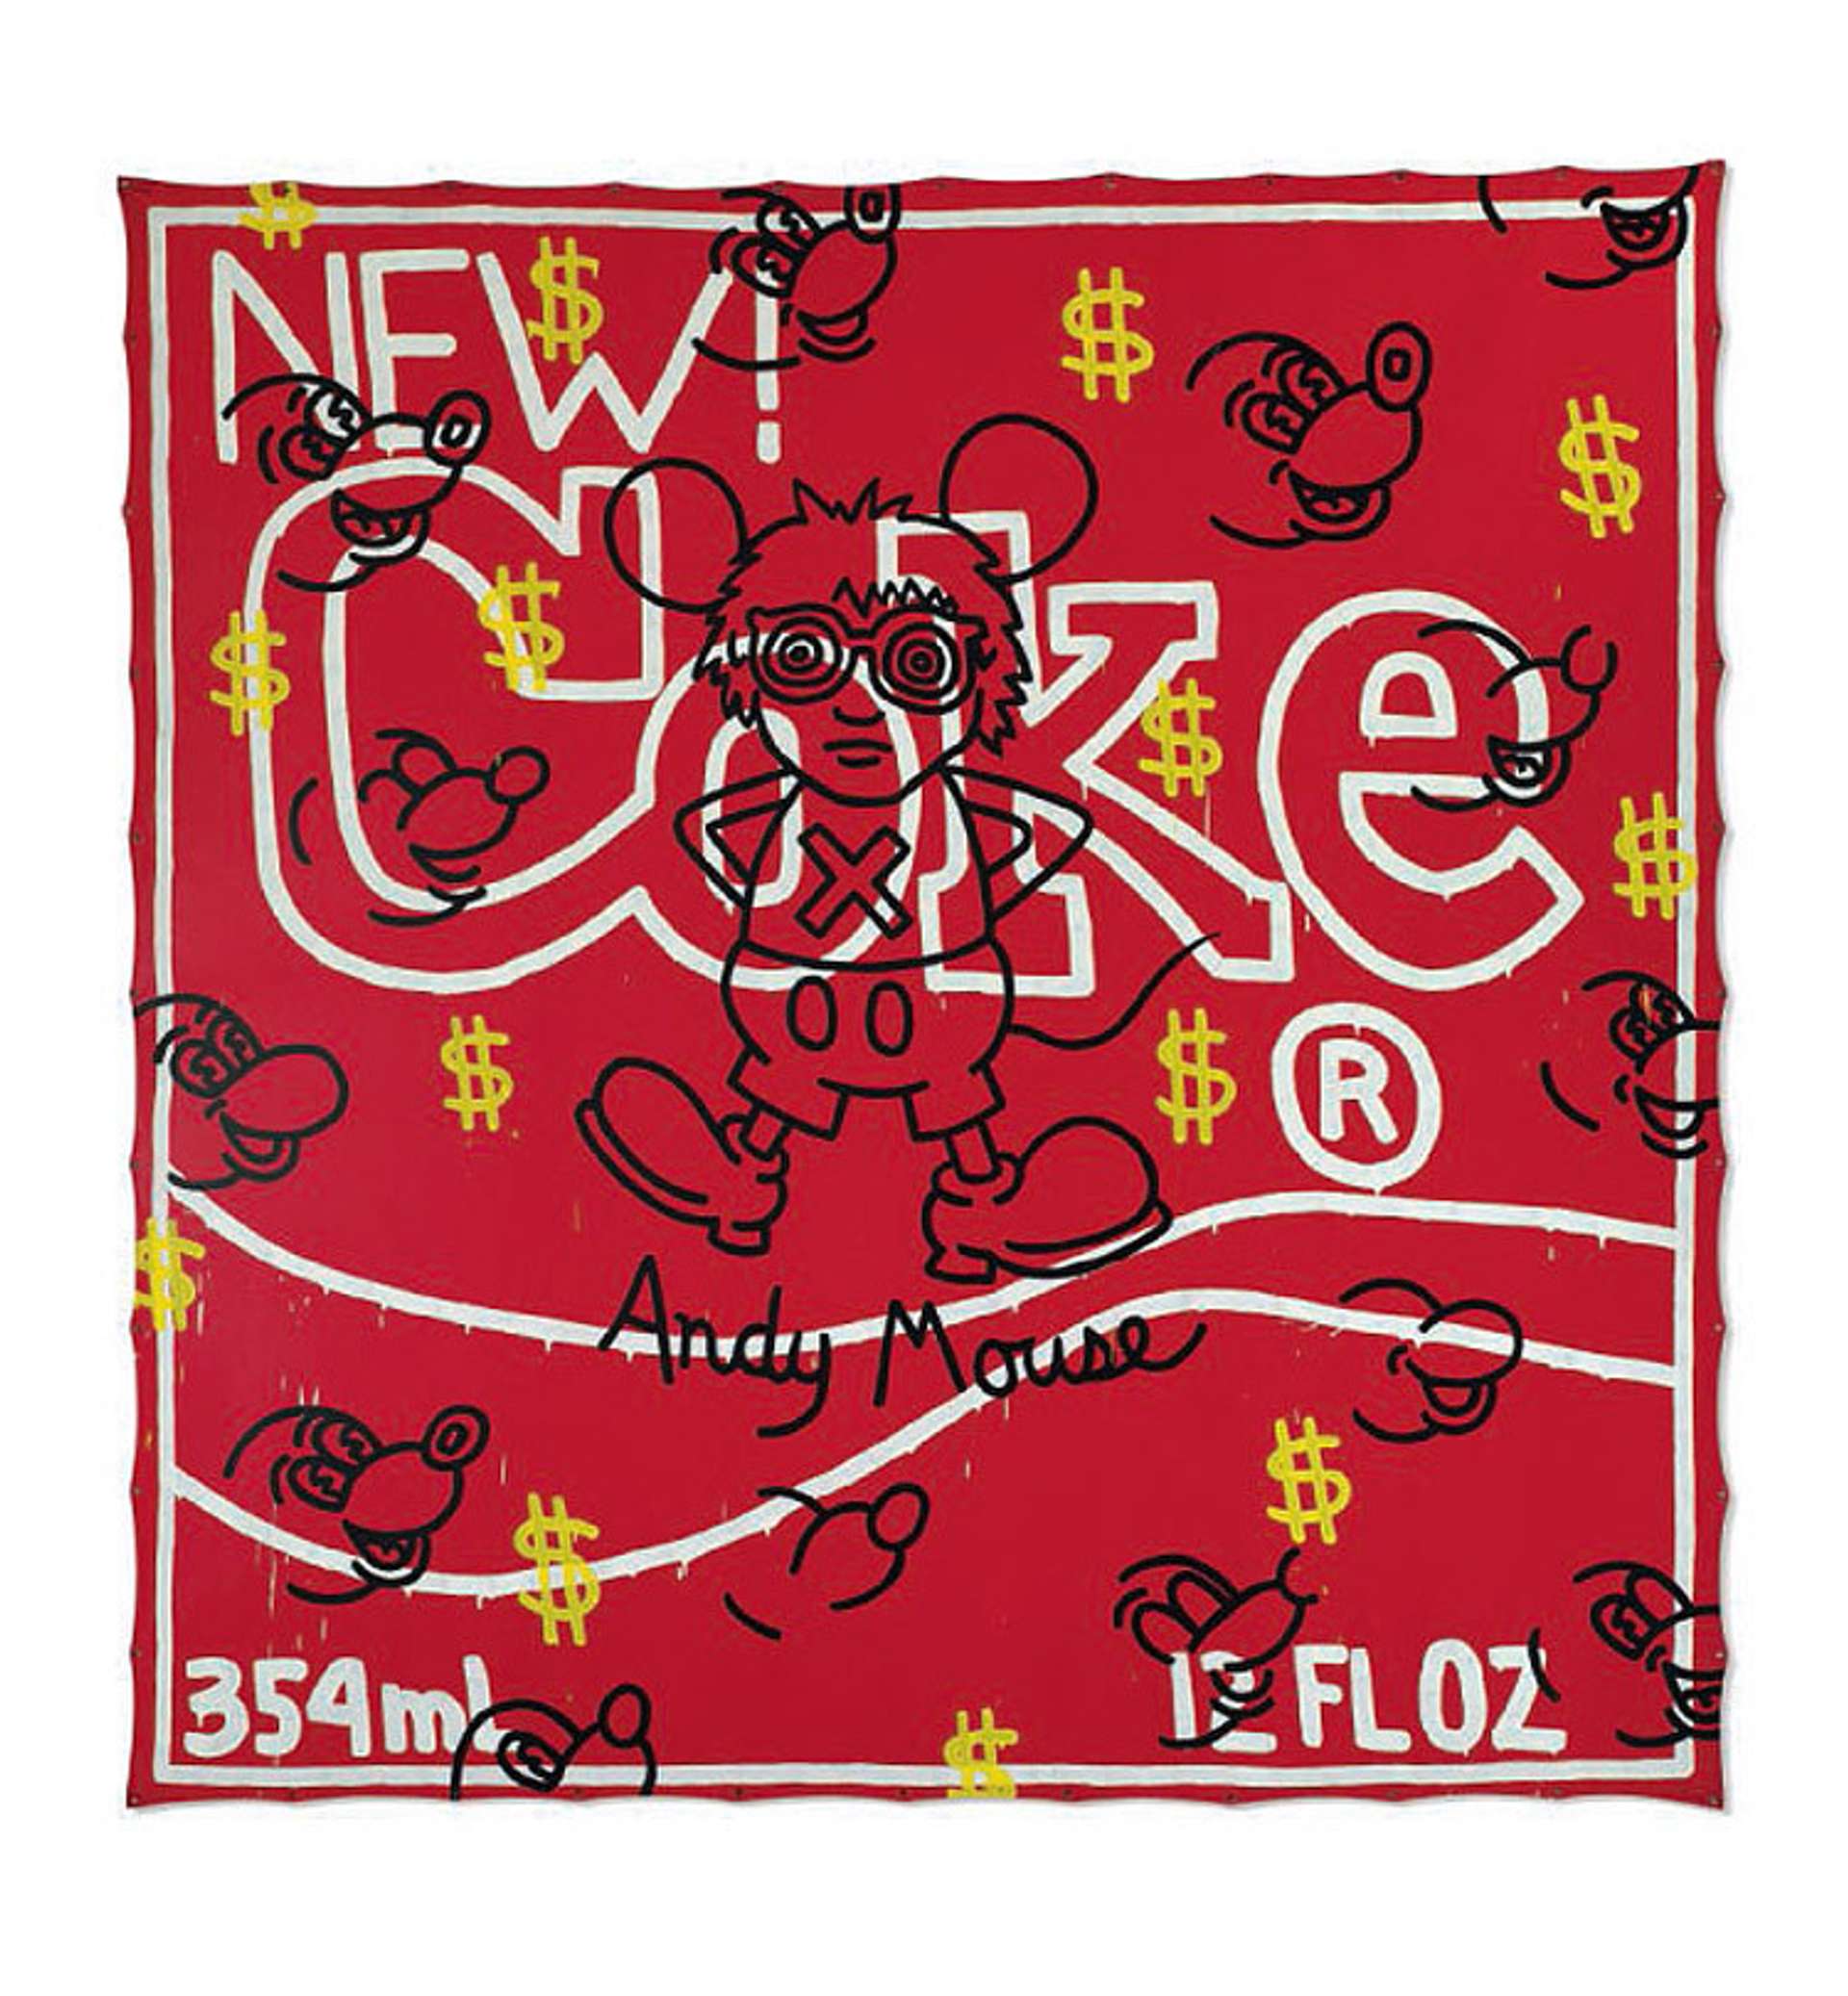 Andy Mouse drawn on a red background with 'new coke' written on it